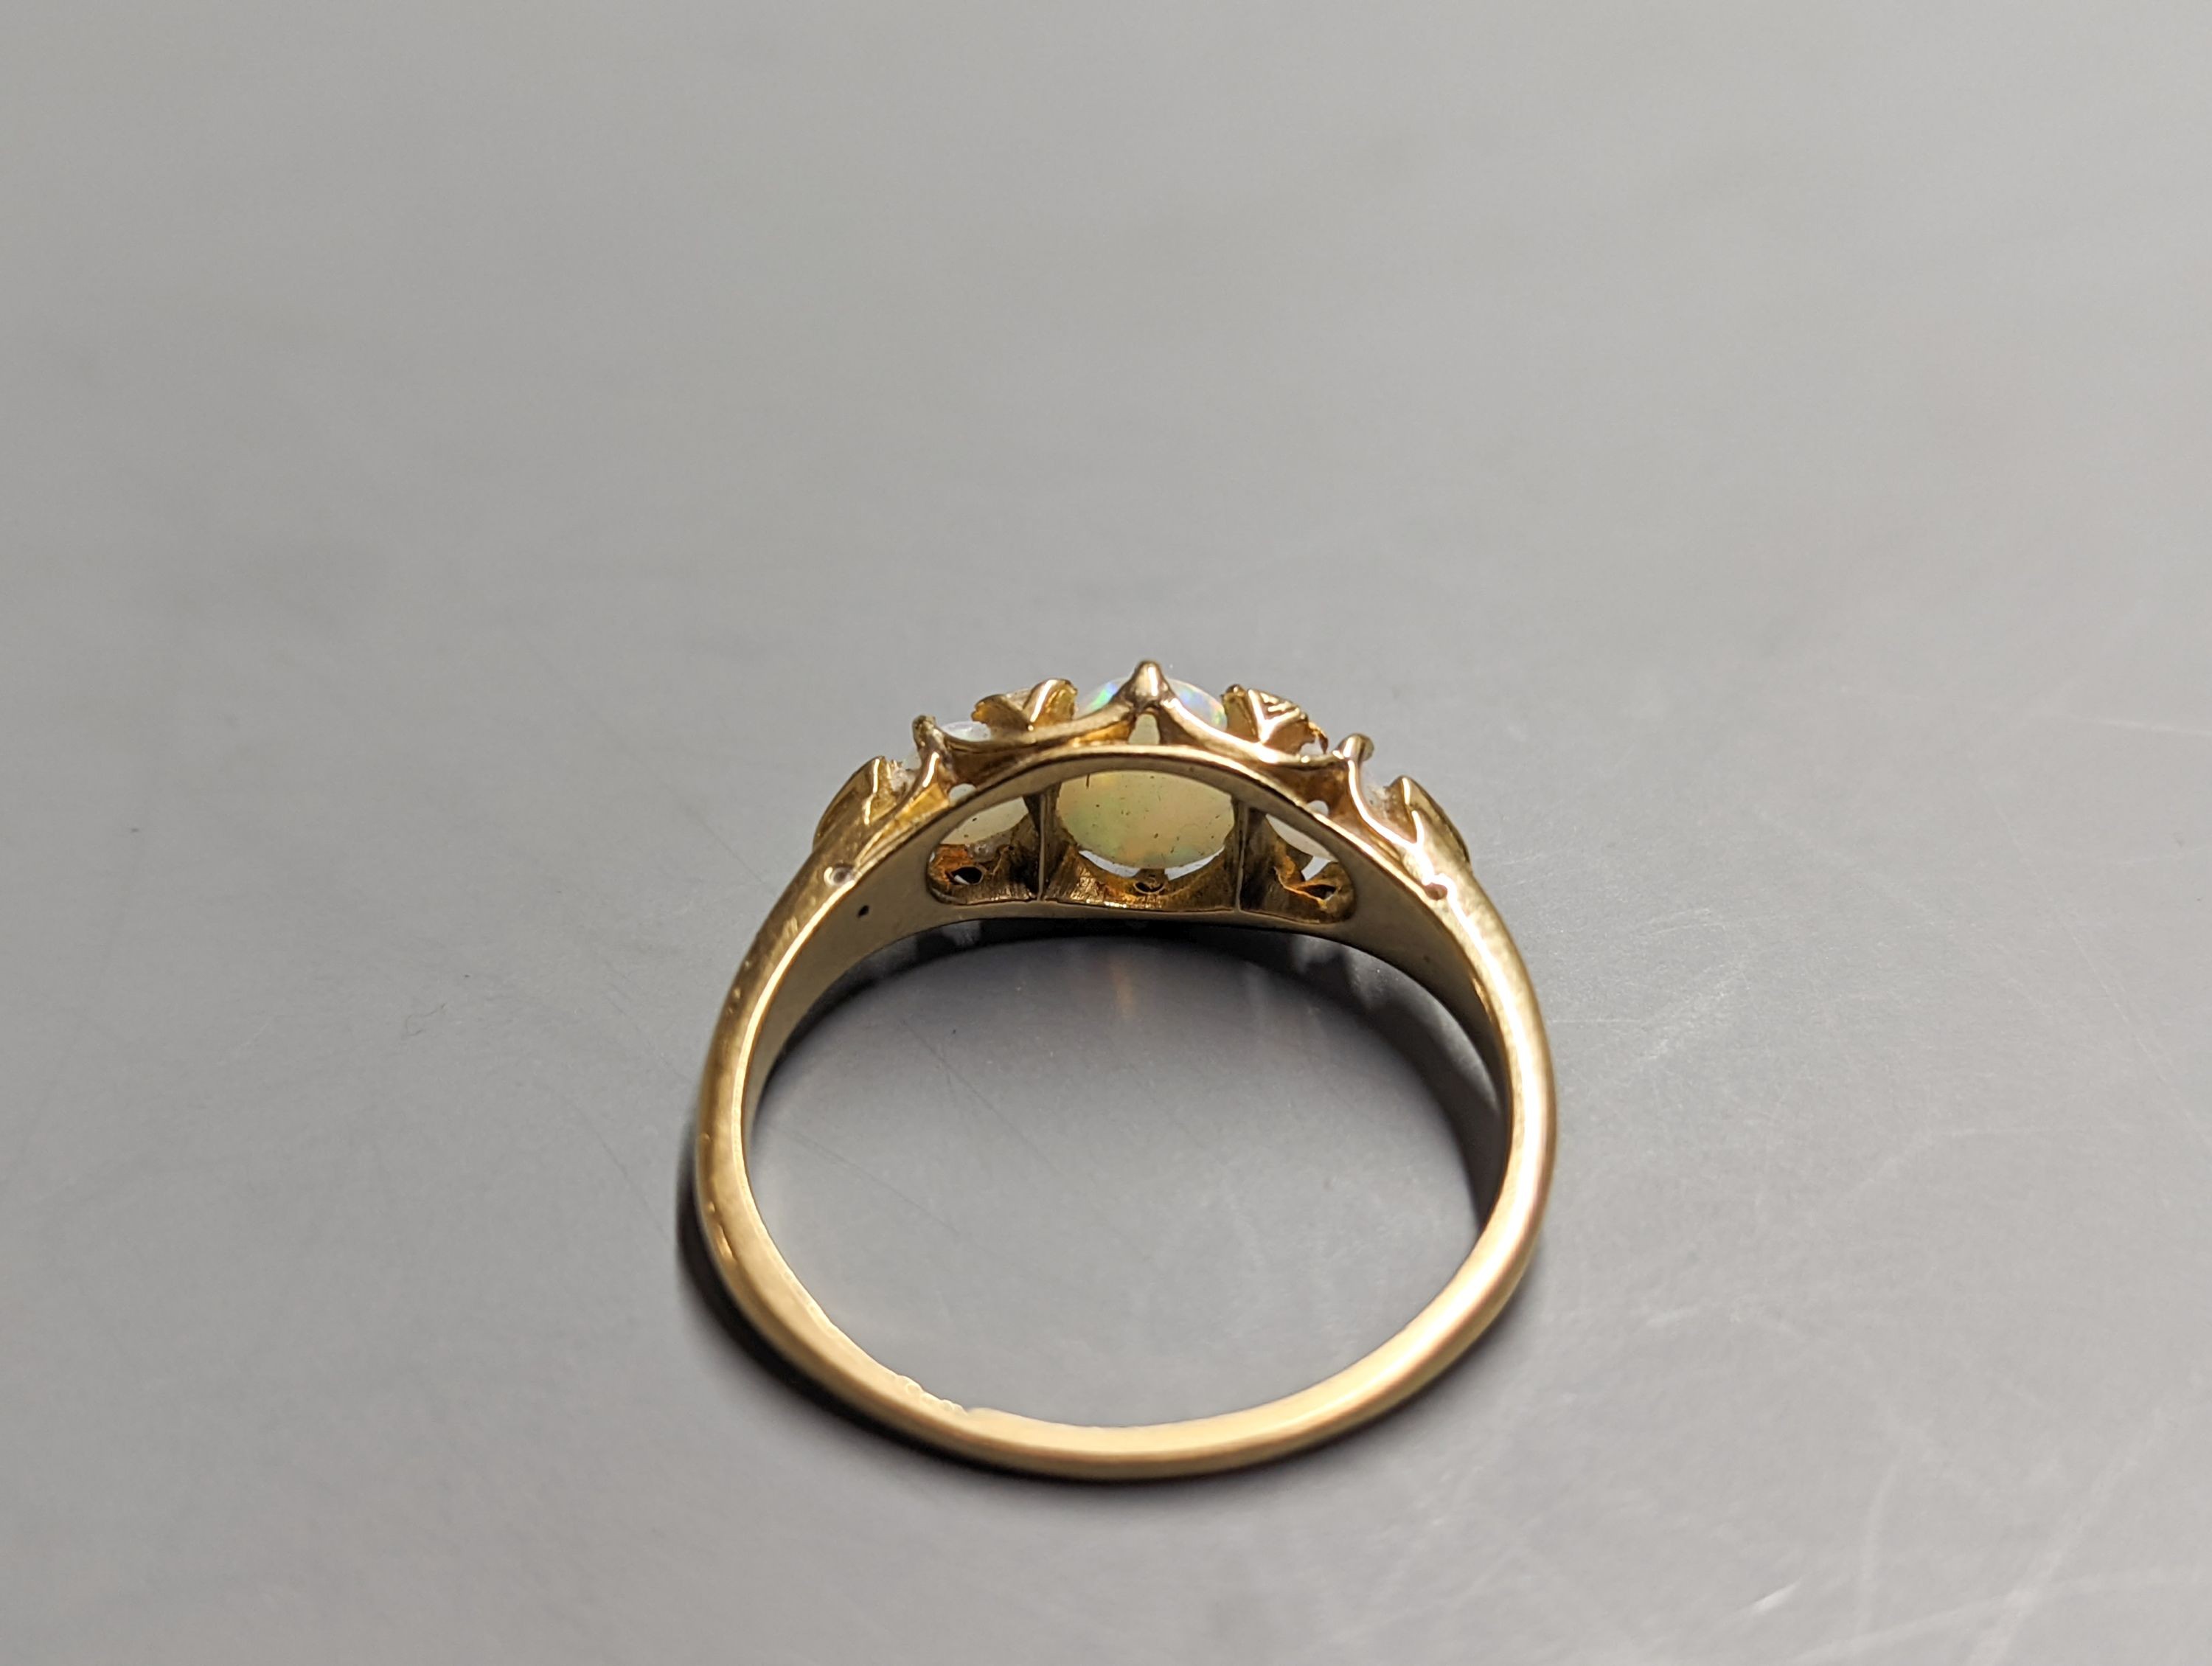 An early 20th century 18ct and three stone white opal set ring, with diamond chip spacers, size Q/R, gross 3.7 grams.